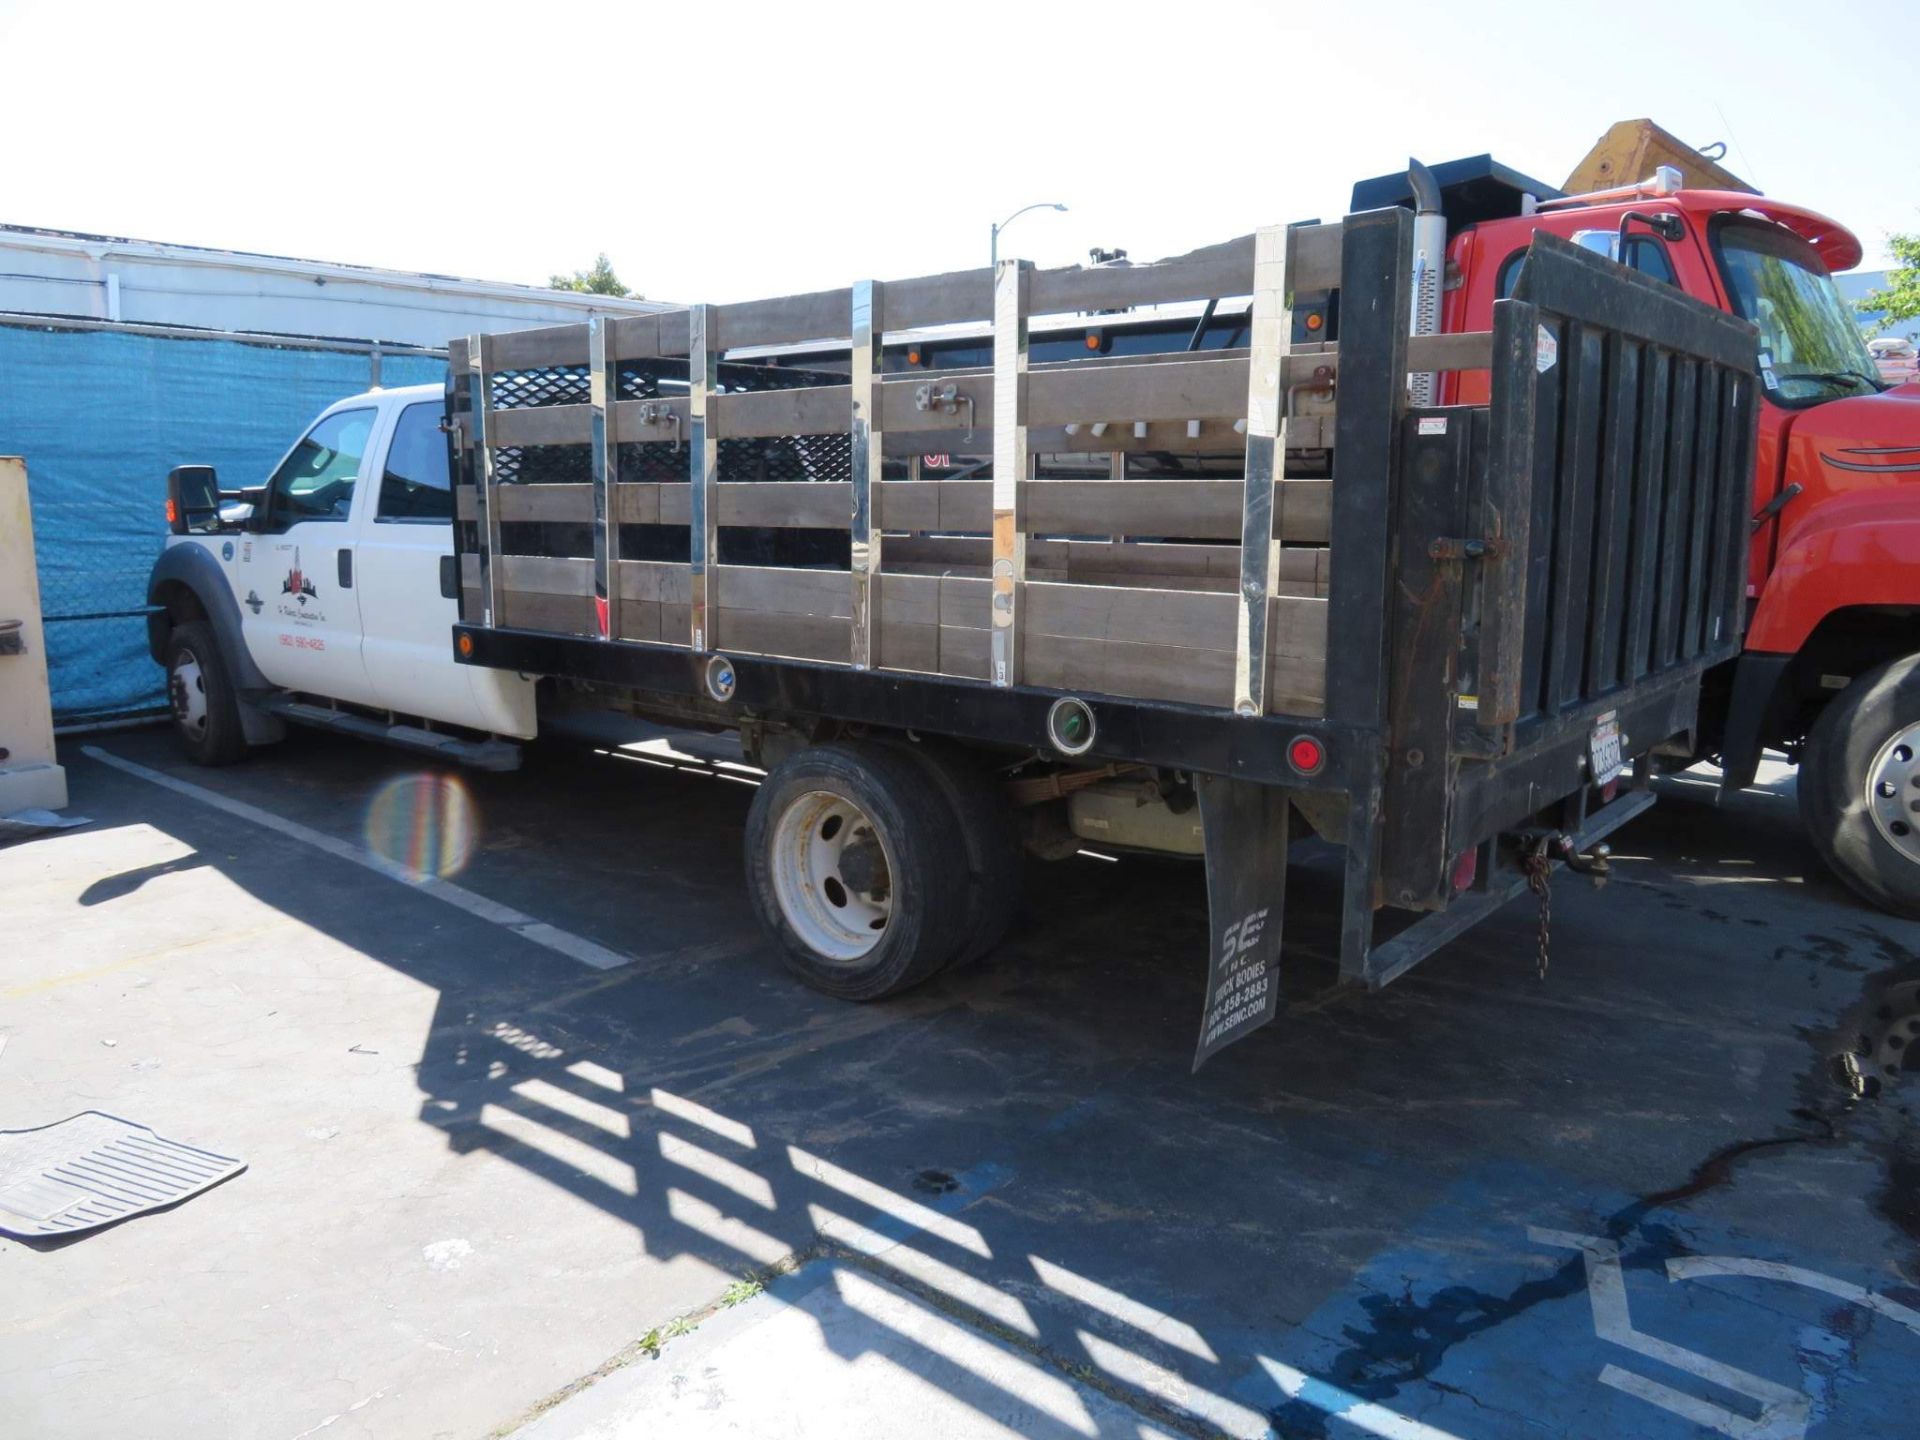 2015 Ford F450 Stake Bed Truck with Lift Gate, Lic. 22363D2, VIN: 1FDOW4GT5FEB34130, Mileage 53,358